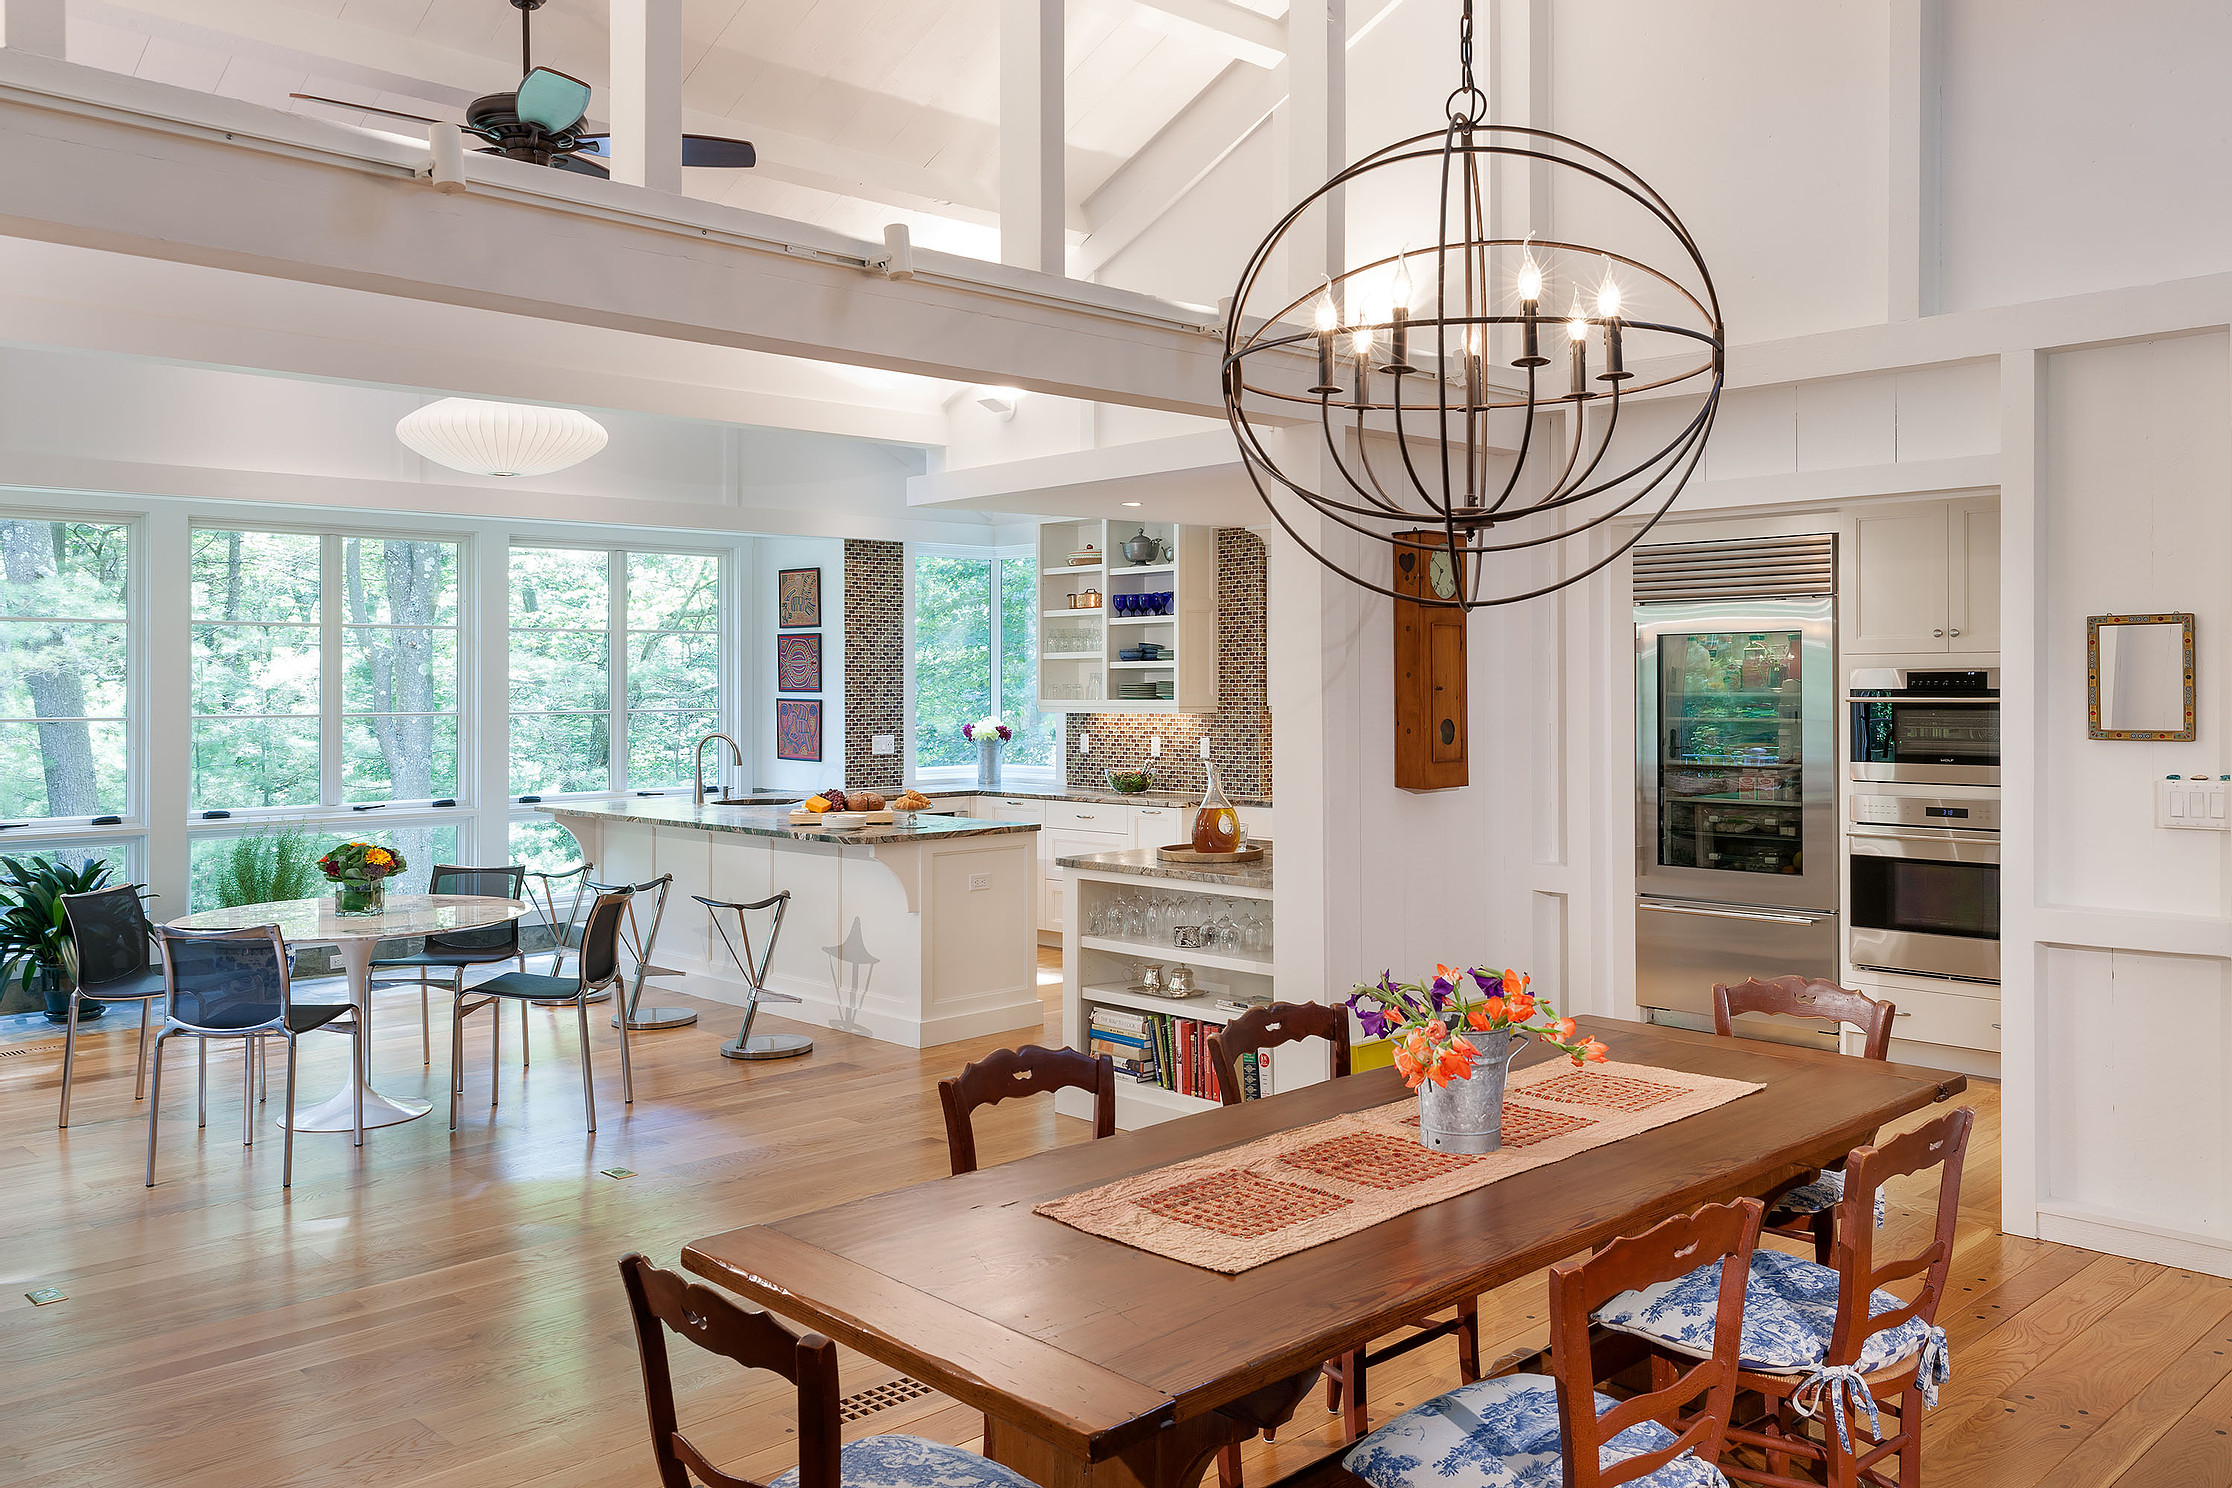 modern kitchen and dining area renovation in dover, massachusetts